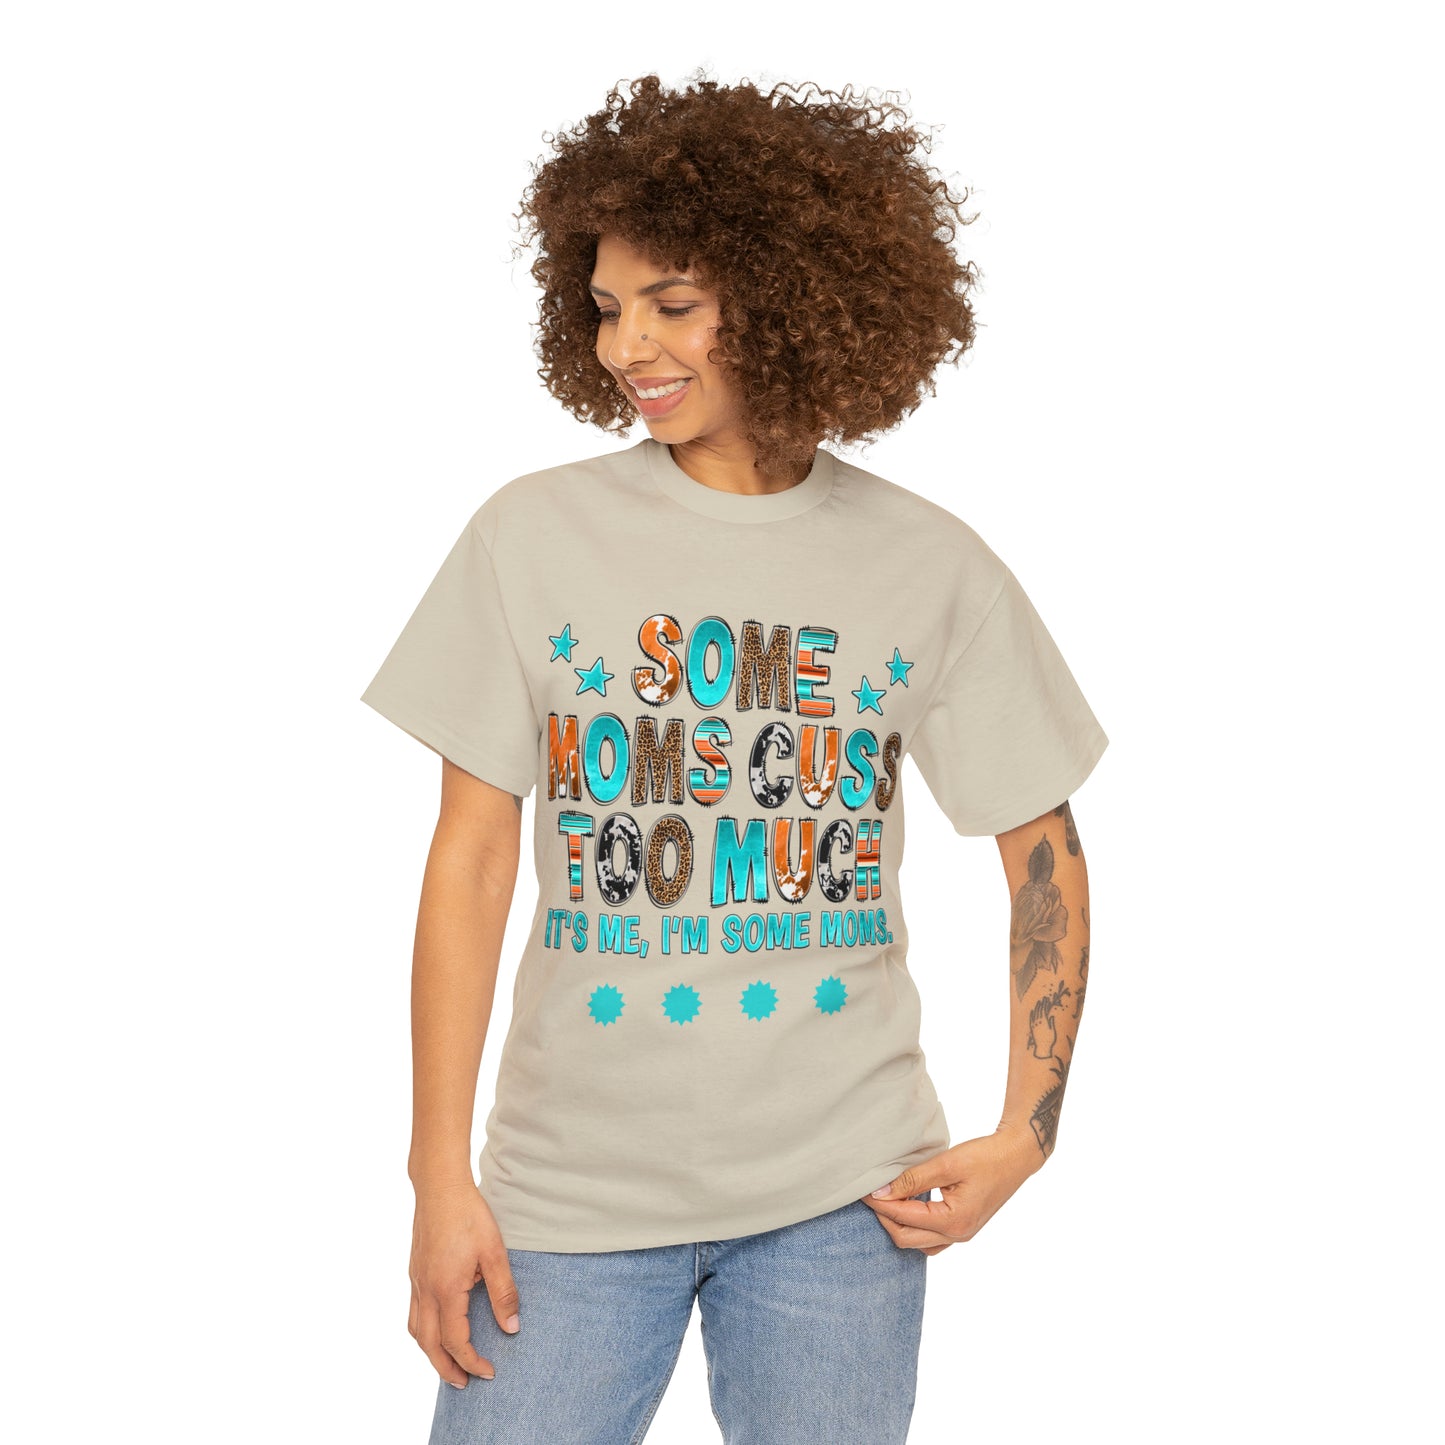 Some Moms Cuss Too Much It's Me I'm That Mom - Mother's Gift Colorful MII Designs Unisex Heavy Cotton Tee